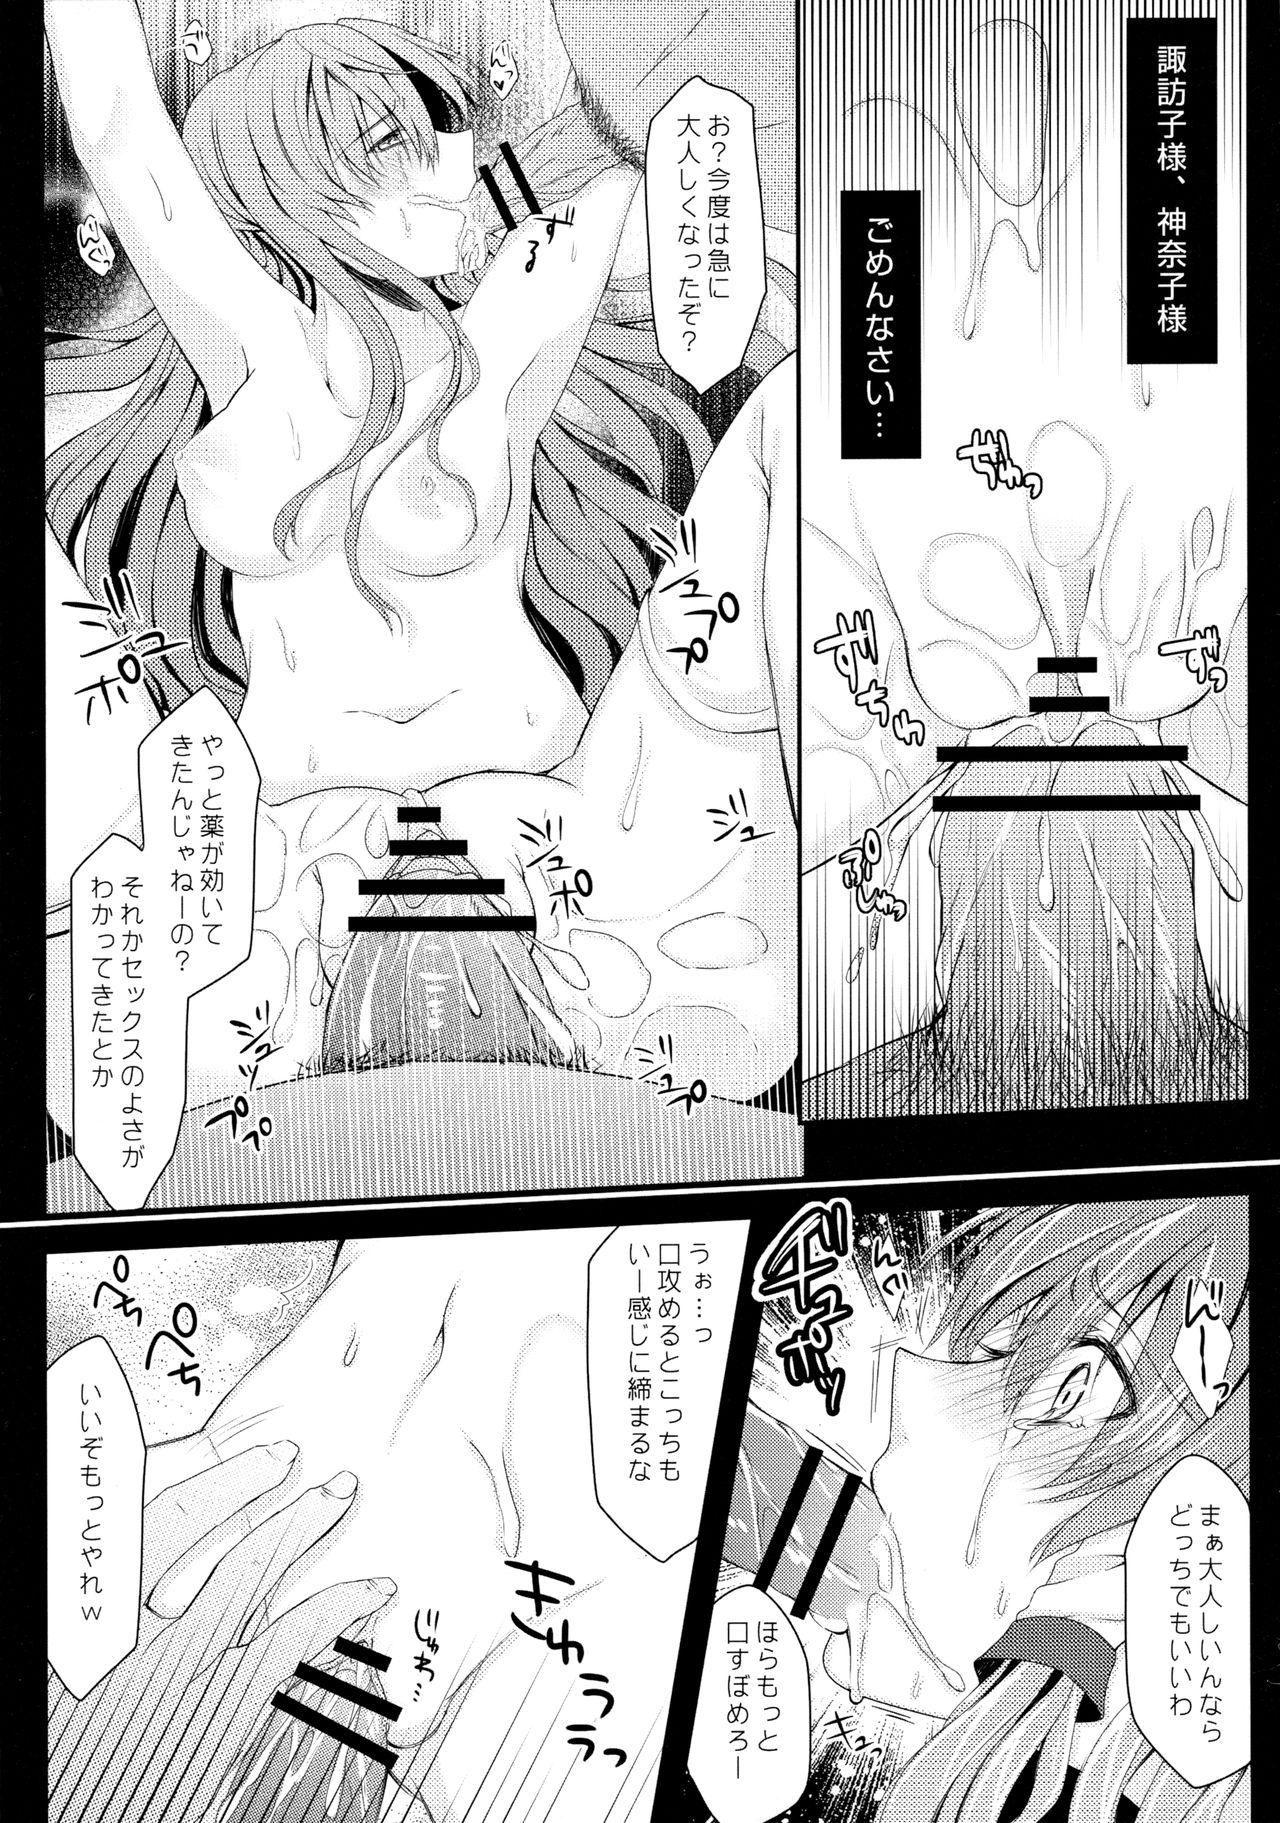 Nudity Filthy - Touhou project Buceta - Page 10